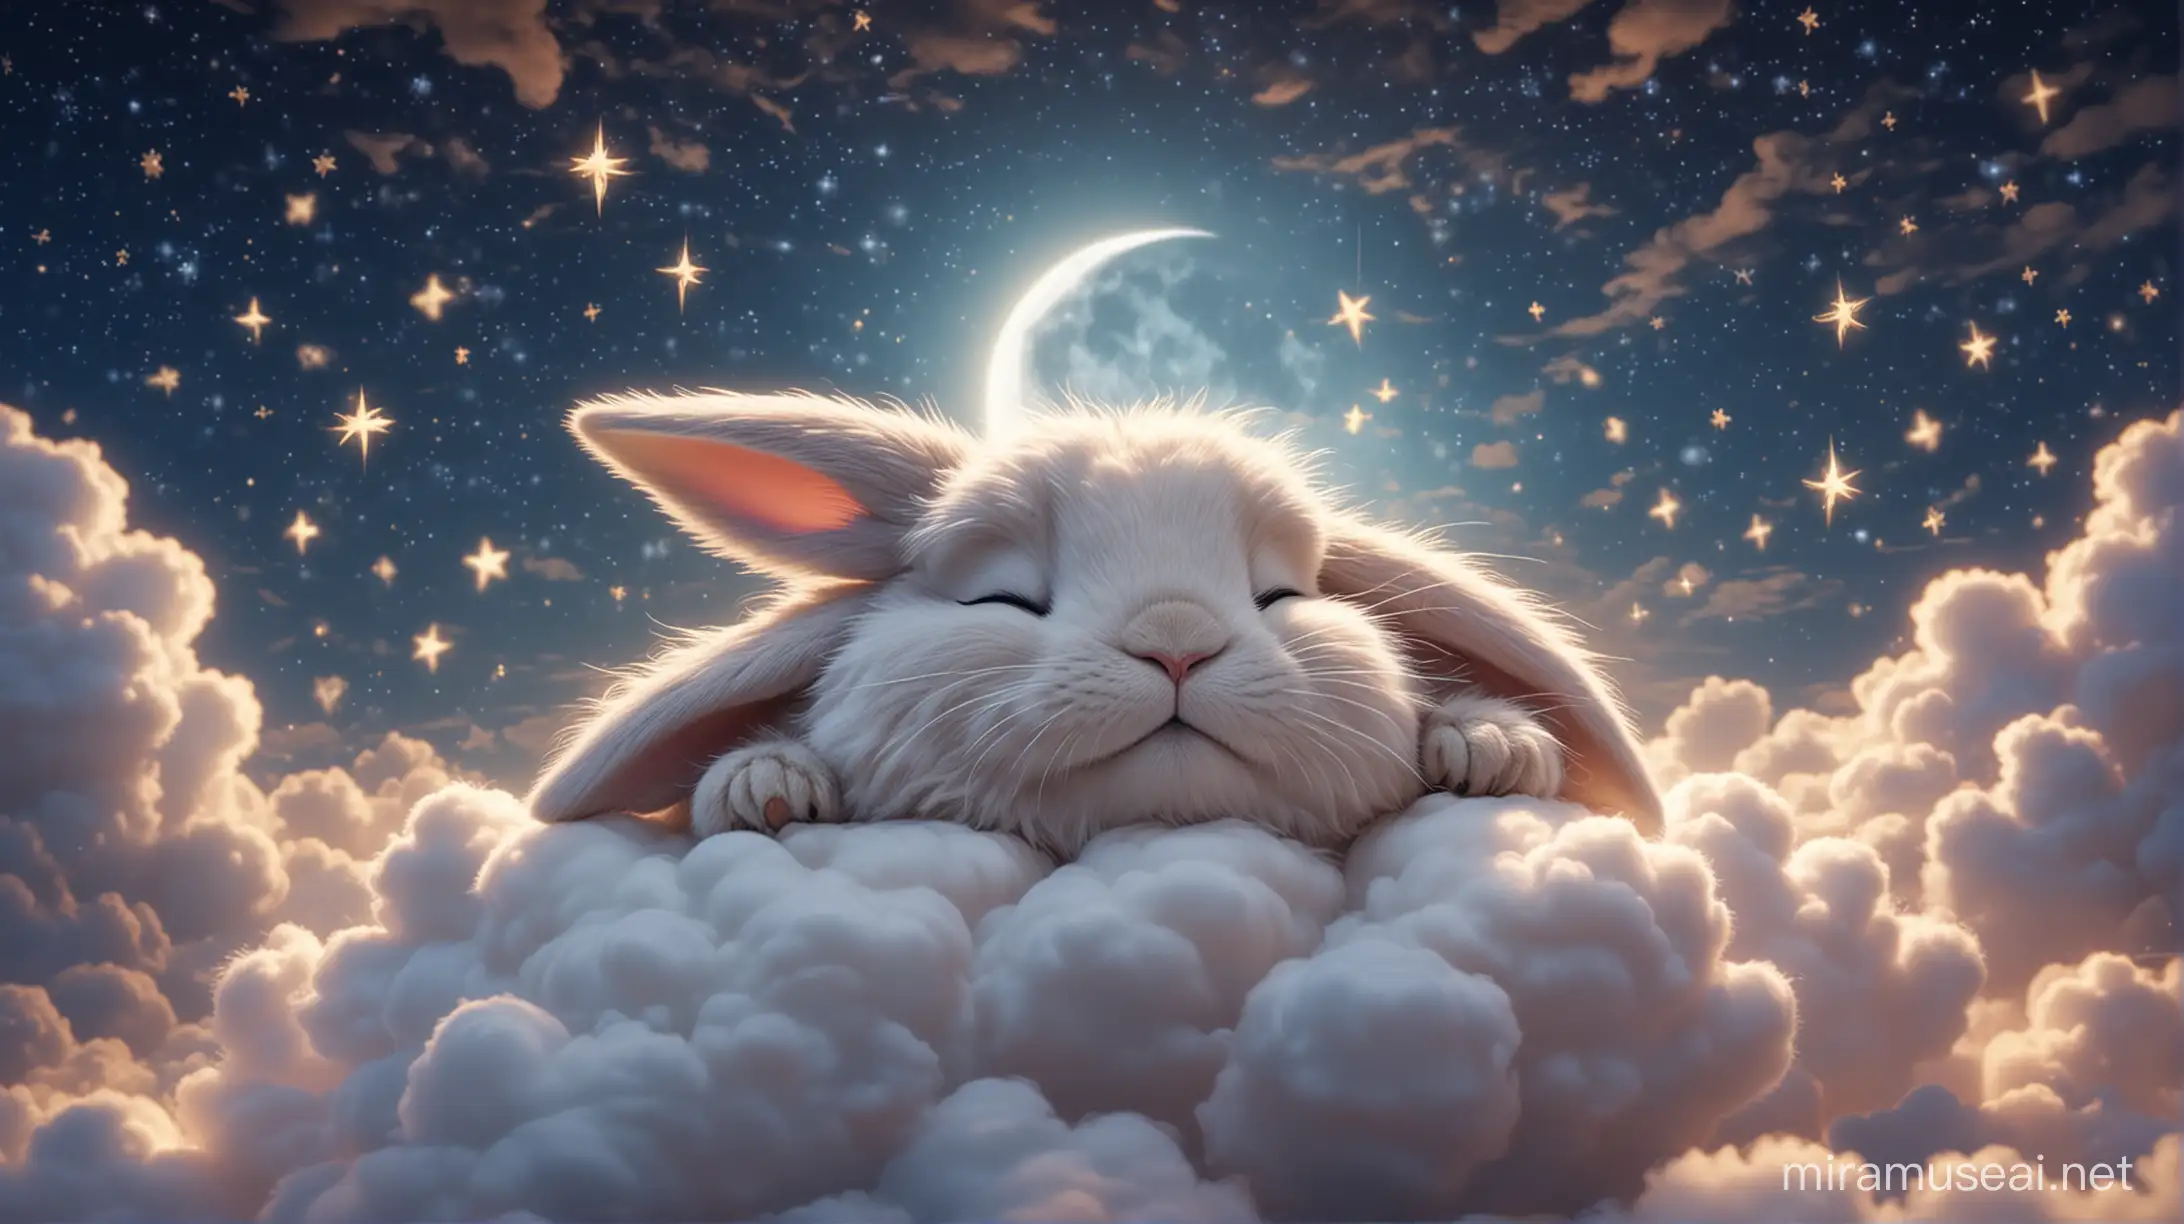 close-up of a small fluffy bunny sleeping on the clouds. The bunny is sleeping and has his eyes closed. In the background you can see the night sky and shining stars. A large shining moon in the distance. A picture in the style of Disney and Pixar animation.